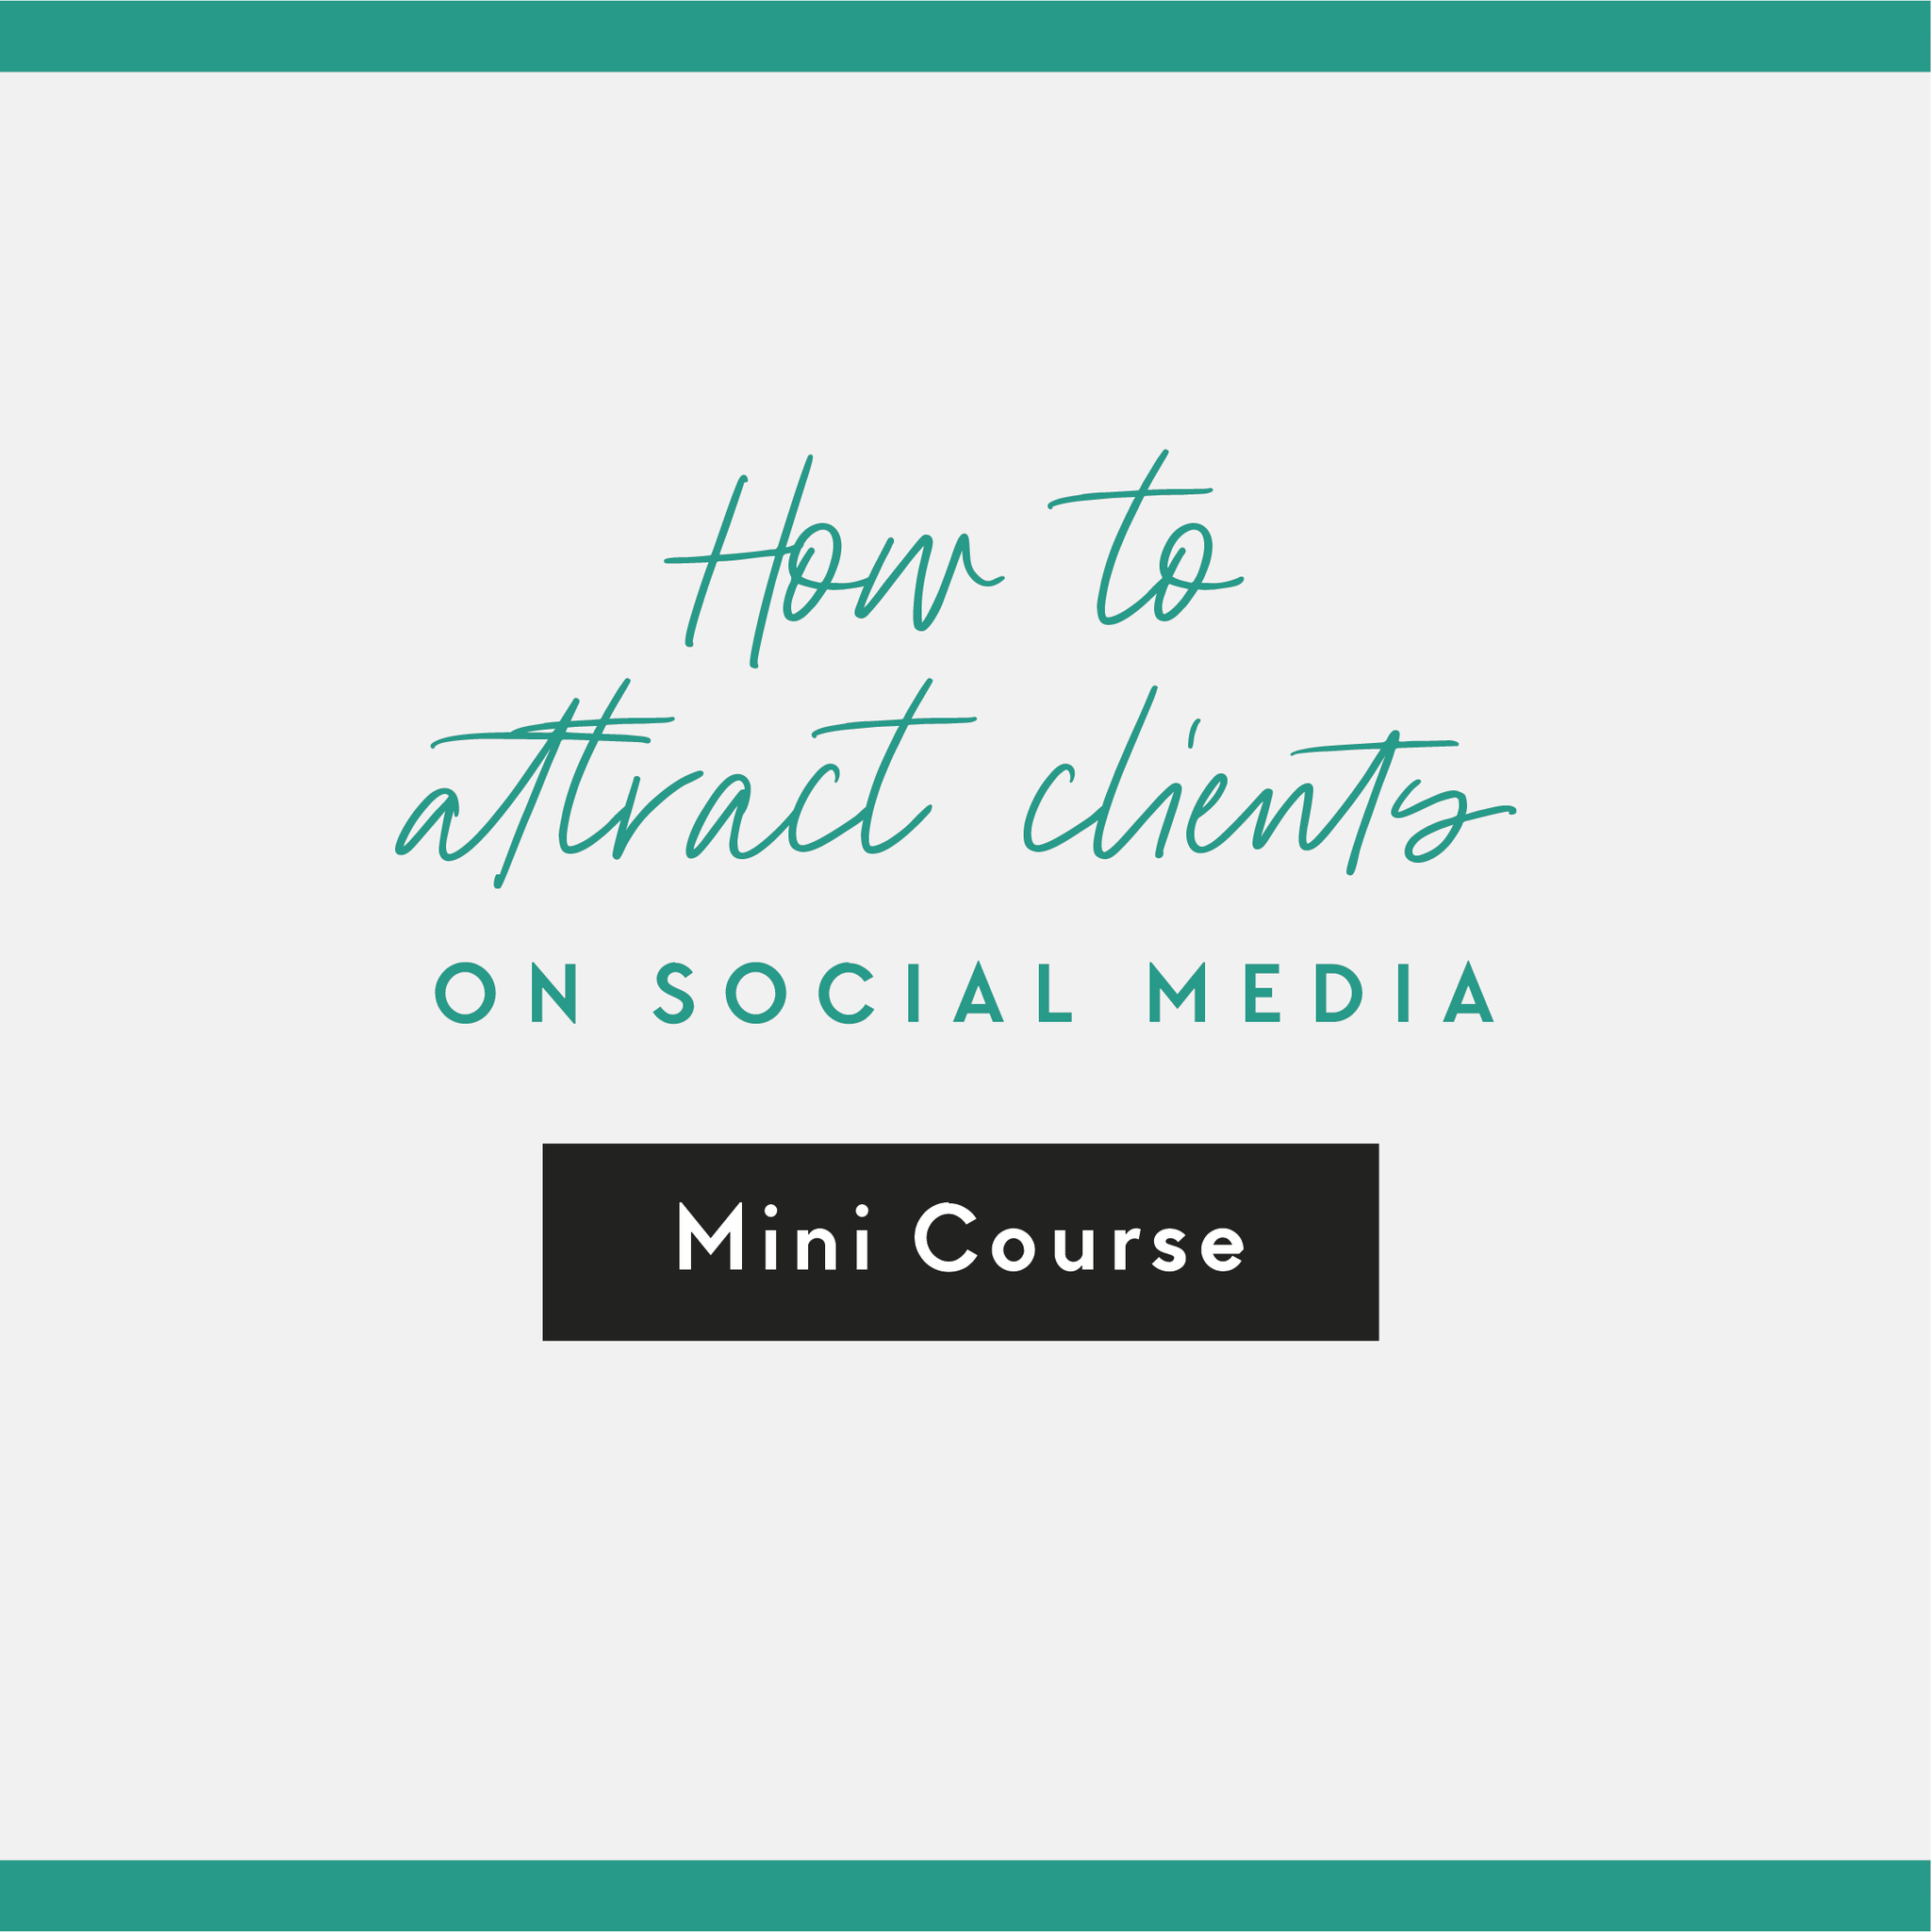 How to attract clients on social media